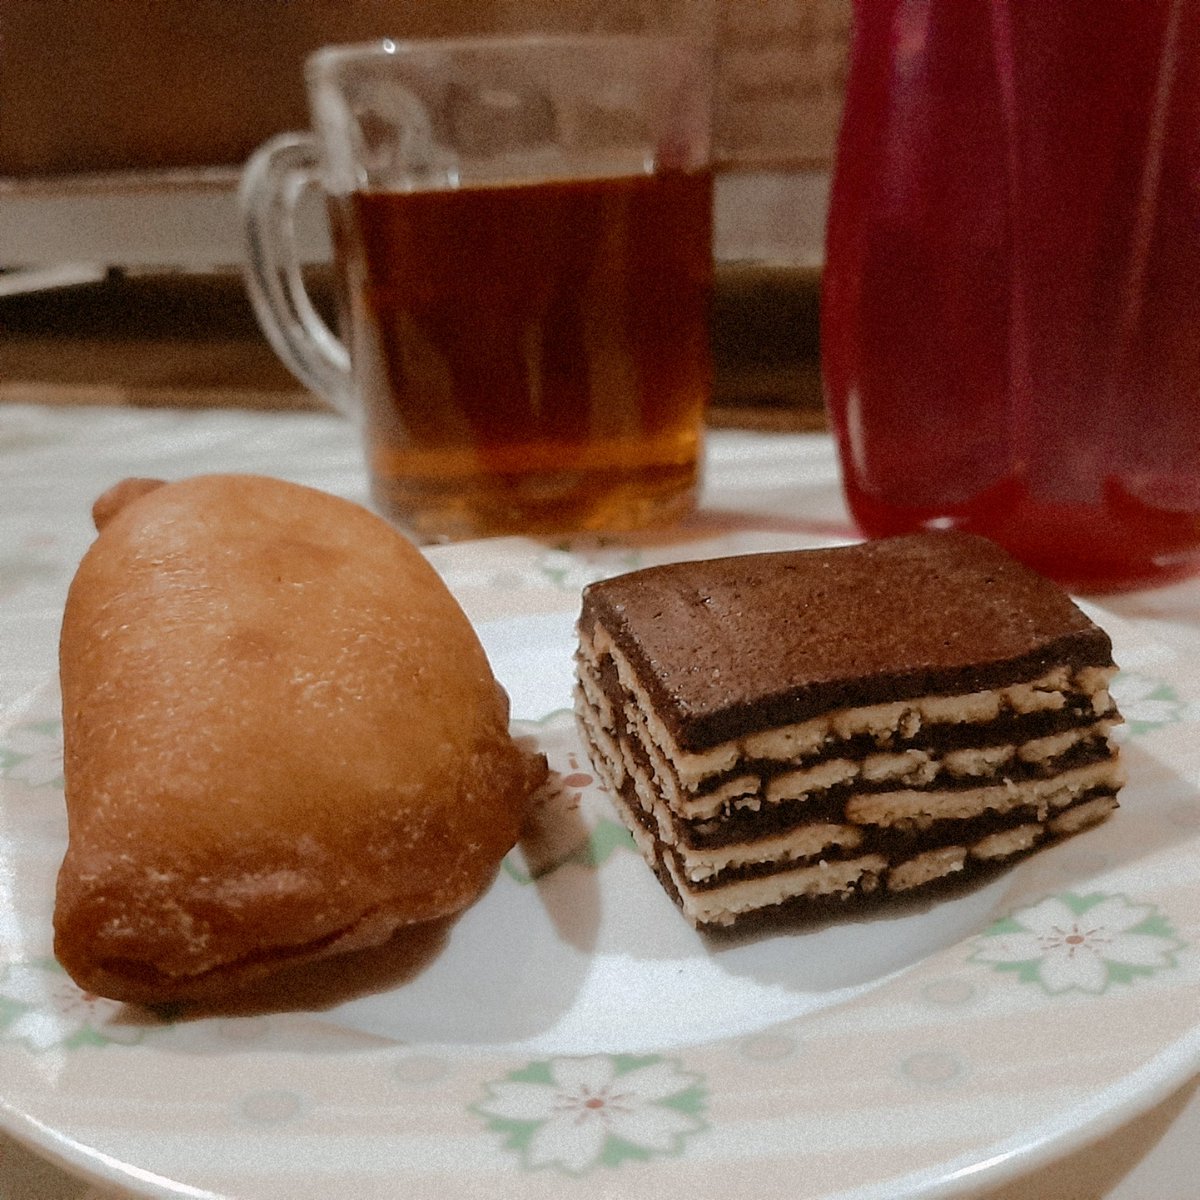 DAY #2 ㅡ 25/04 06:13 PMbisquit brownies cake, panada, and a glass of tea as my iftaar meal